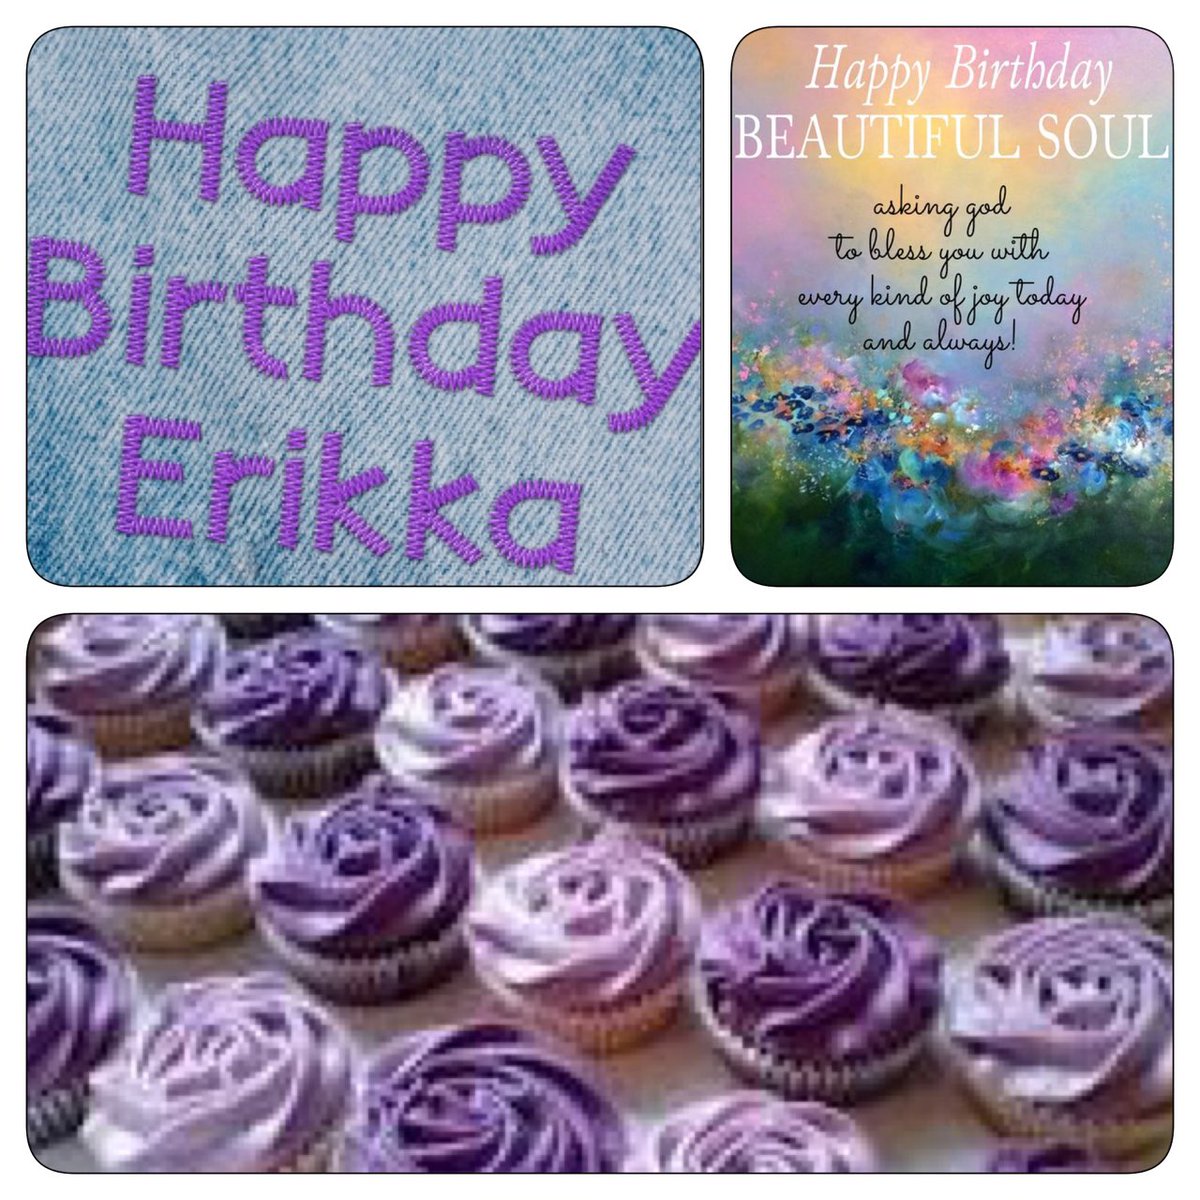 Wishing my good friend Errikka @iggiesrule89 a very Happy Birthday today . Hope it’s a day as special as she is to us all . Much Love &. Cayke 🎂🎈🎉🎊🌸💕💜💖🥂❤️